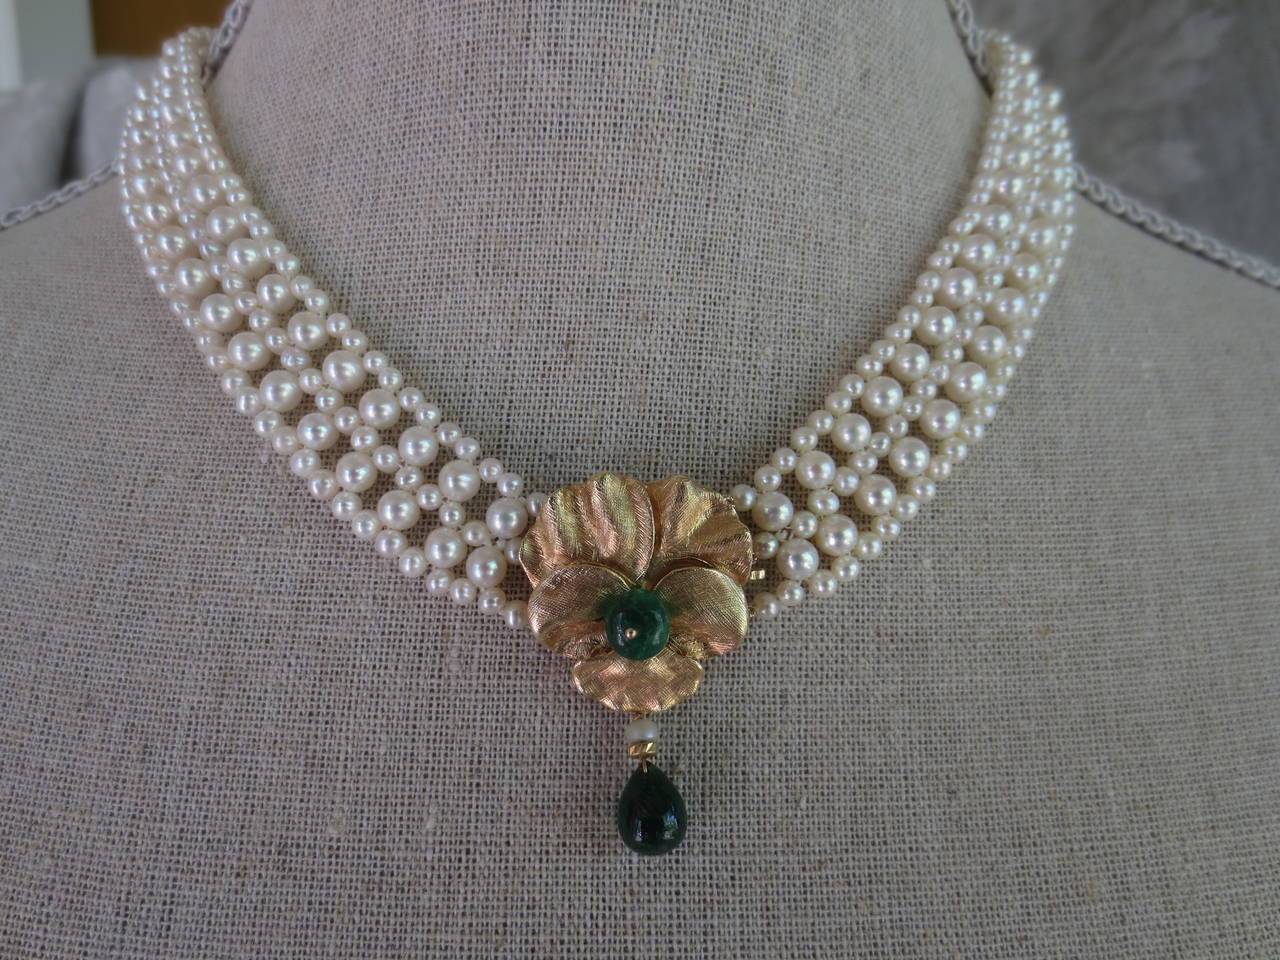 This handwoven white pearl necklace with emerald and 14 k yellow gold floral centerpiece is beautiful and practical as the centerpiece acts as a front-facing clasp. The floral design centerpiece is made of 14 k yellow gold petals with a central